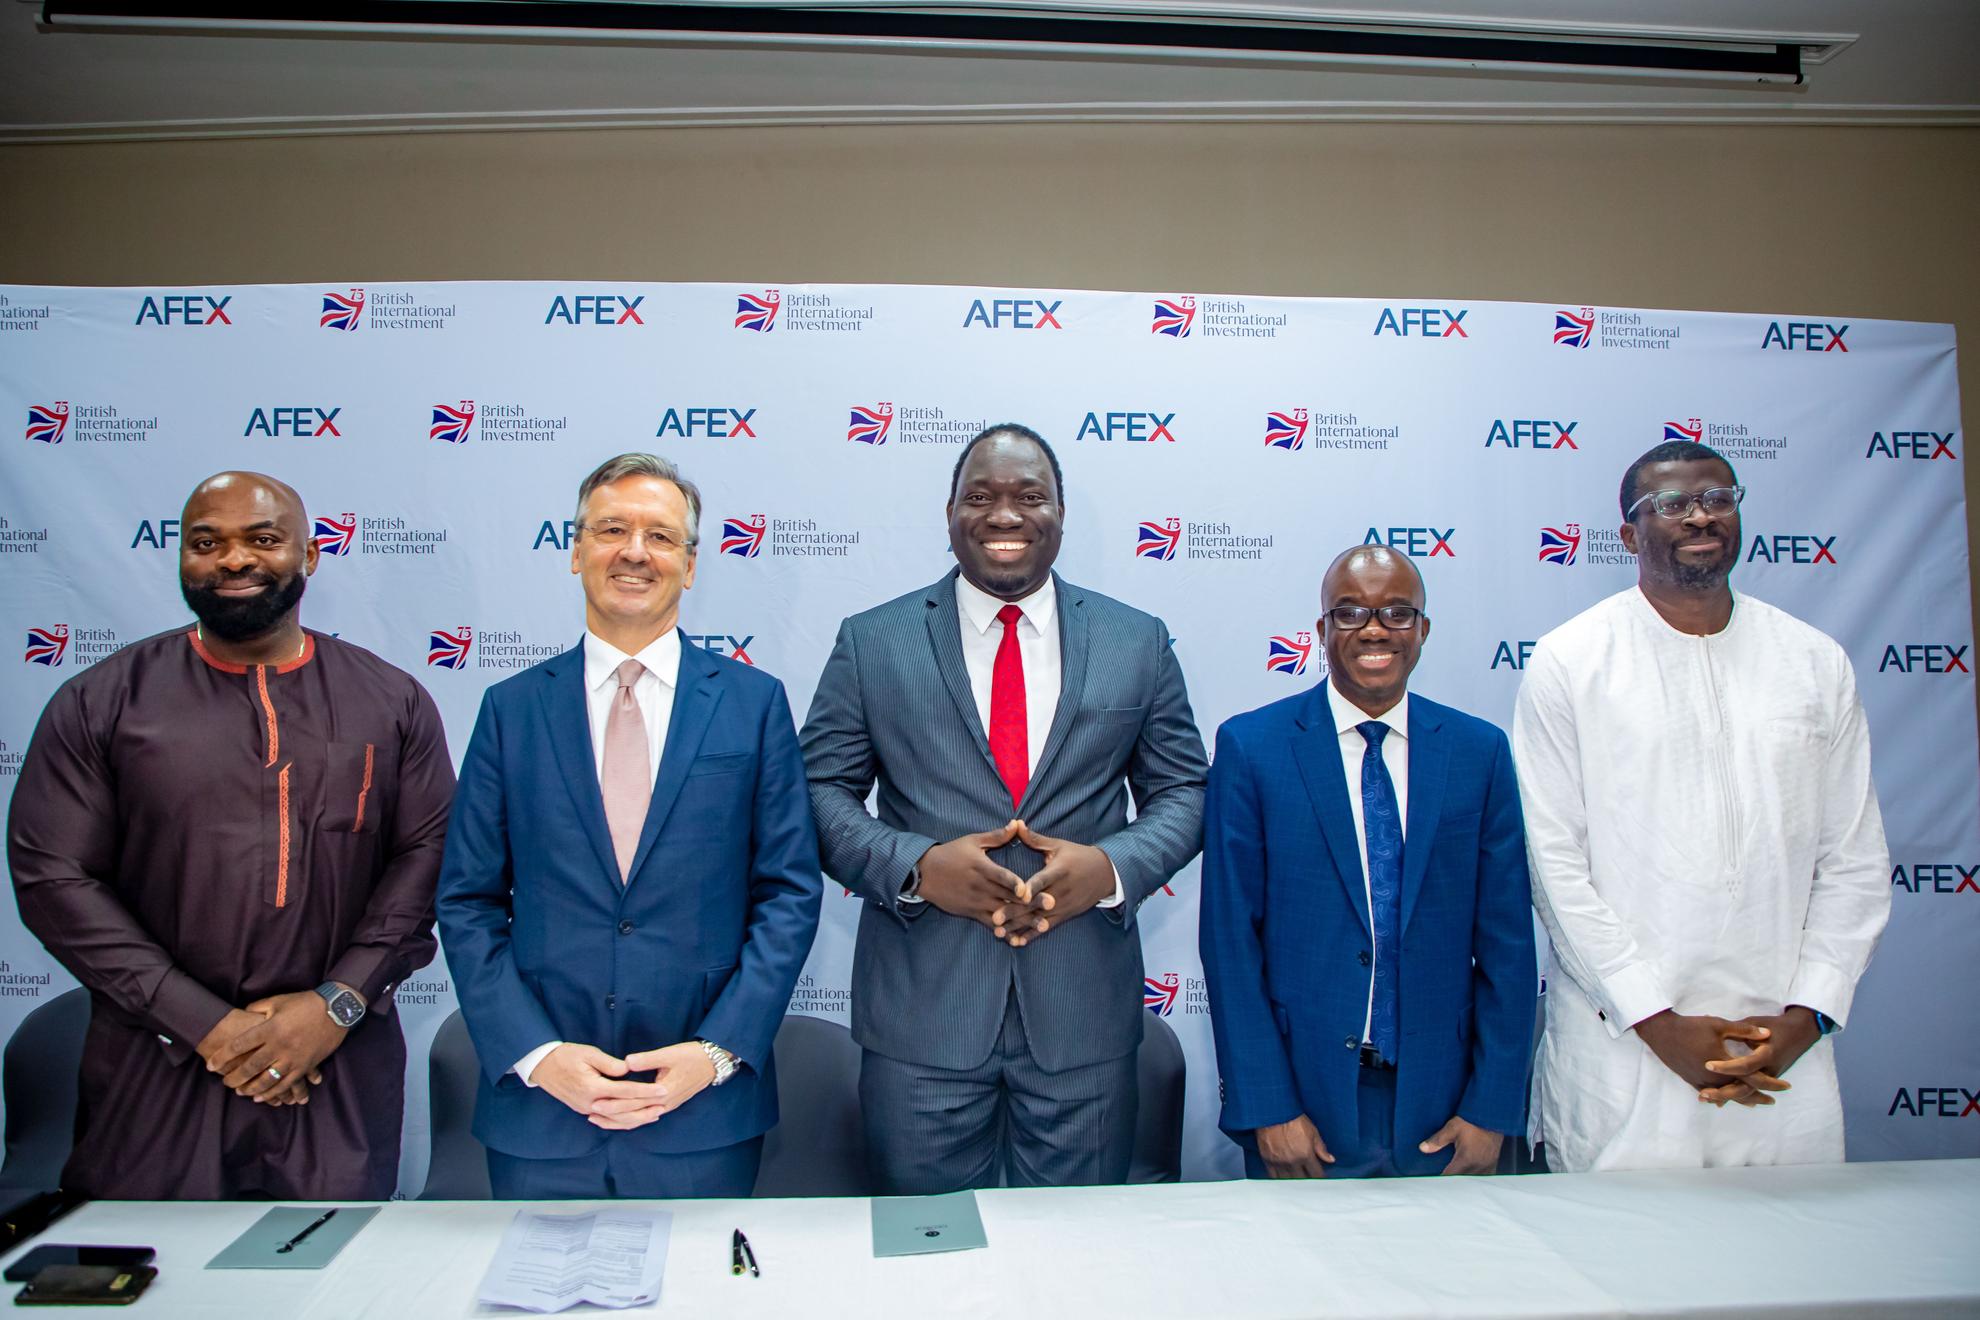 British International Investment Commits $26.5m to AFEX to Address Food Security in Nigeria, Kenya and Uganda